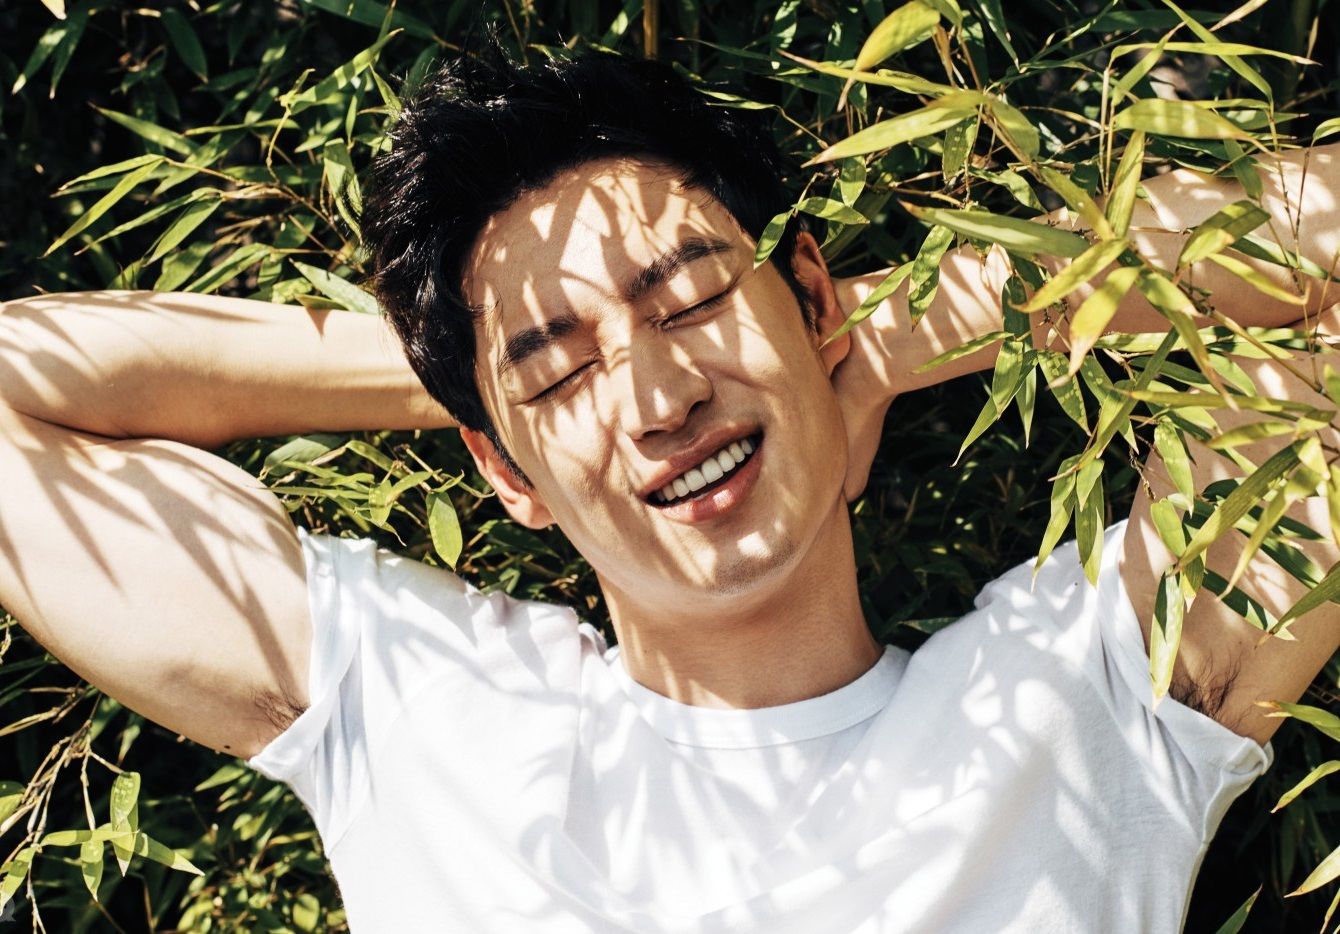 Lee Je Hoon Gains Attention Online For His Sweet Act Of Kindness On The Subway